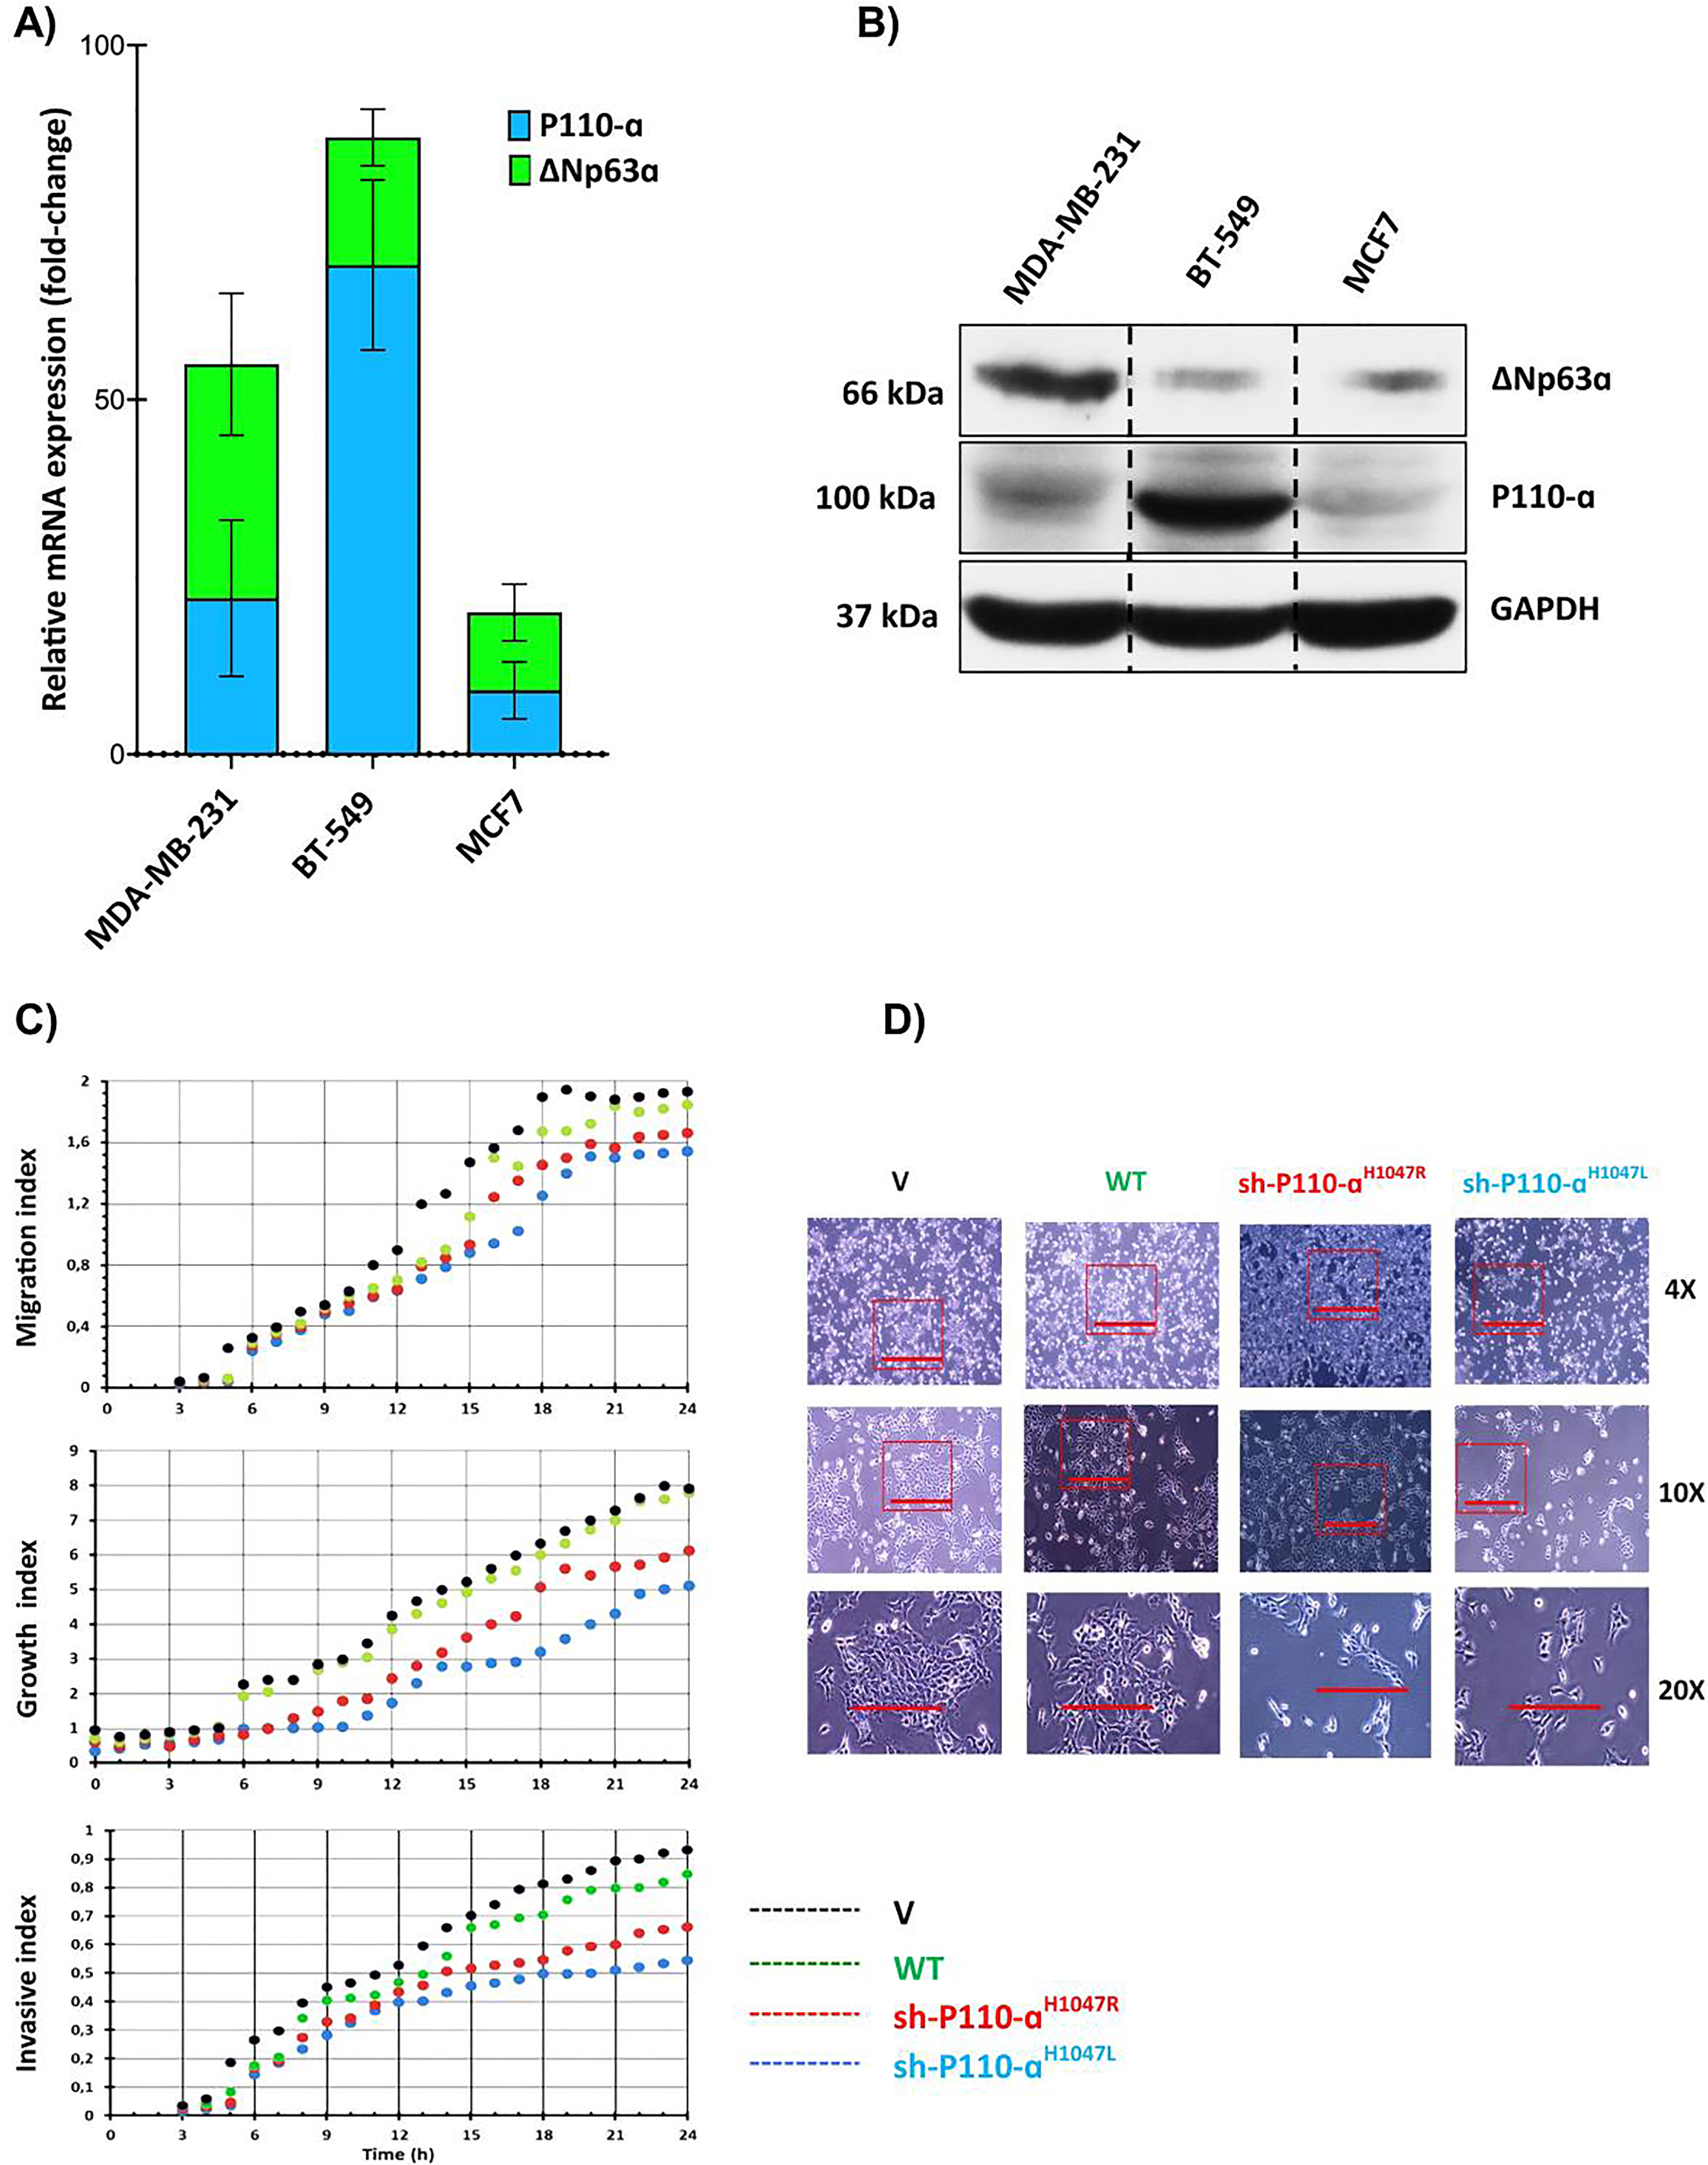 Comparison and impact of p110α and ΔNp63α expression in breast cancer cells. (A) The relative mRNA expression levels of p110α and ΔNp63α in advanced breast cancer cell lines. (B) The protein levels of p110α and ΔNp63α in advanced breast cancer cell lines. (C) Cell migration, growth, and invasion were measured using a real-time cell analyzer. (D) Comparison of cell morphologies of BT-549 cells expressing p110αH1047R/L or vector control. Impact of p110αH1047R/L on Cell Migration and Invasion in BT-549 Cells. The BT-549 cells were transfected with shRNA-p110αH1047L and p110αH1047R plasmids for 24 hours.